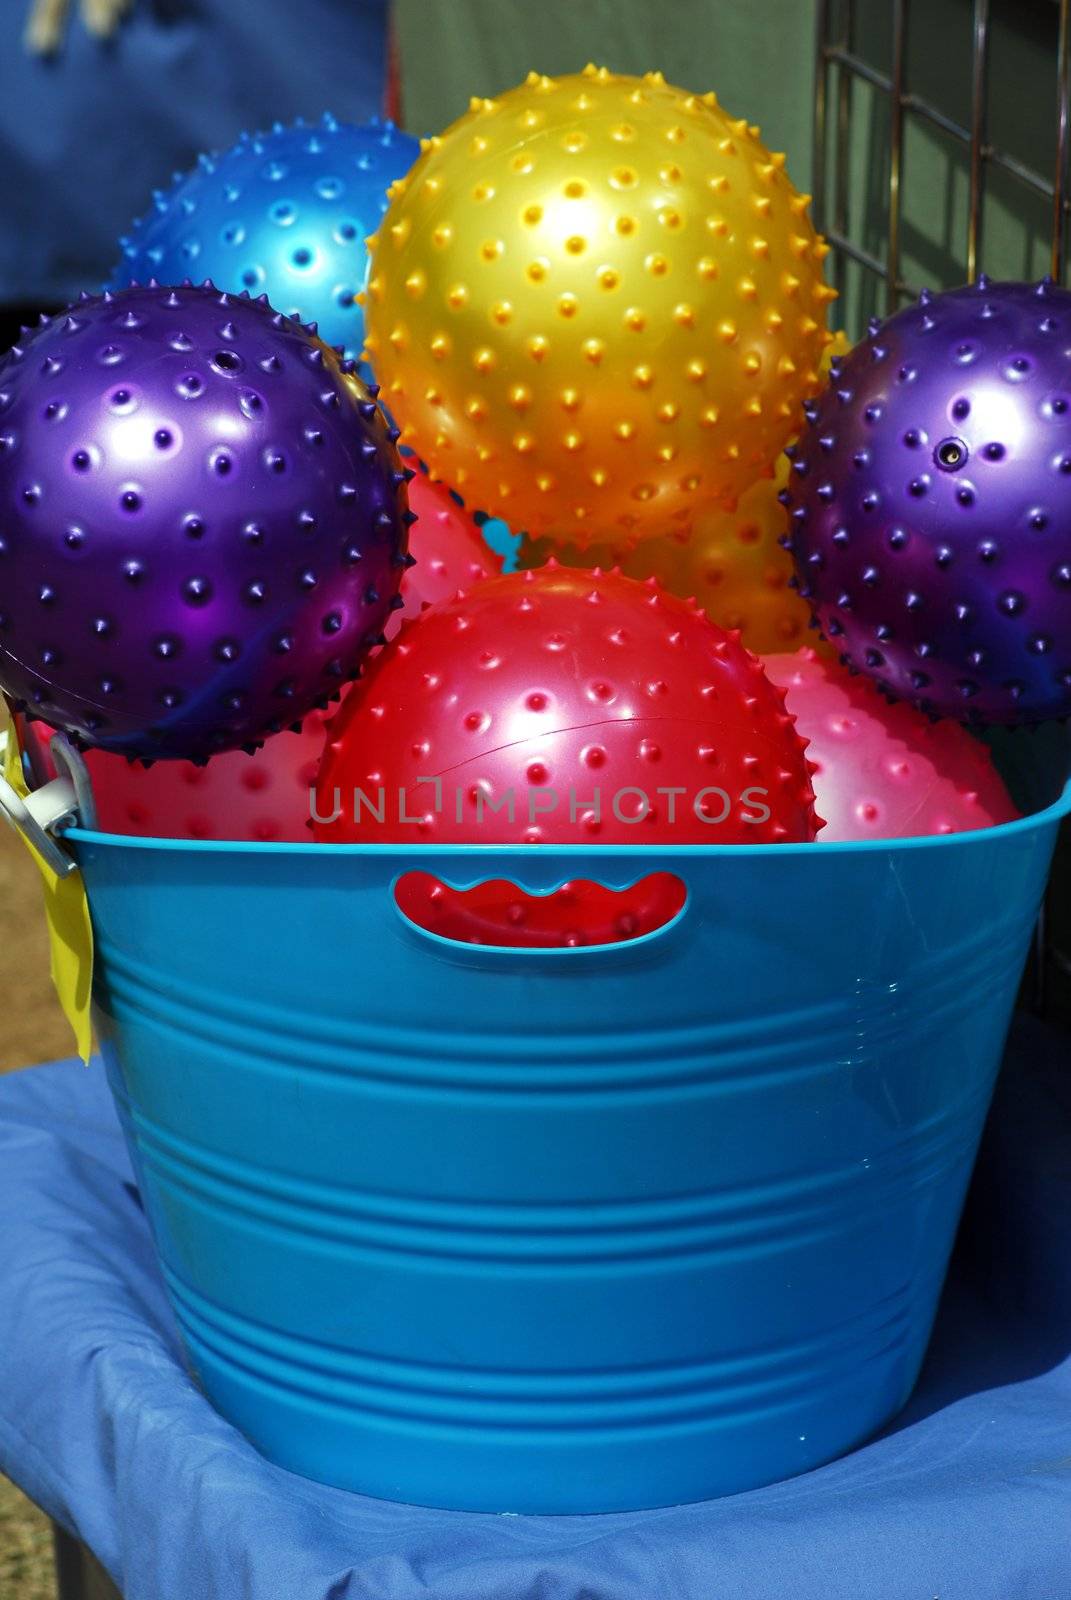 Toy Colored Balls by nikonite